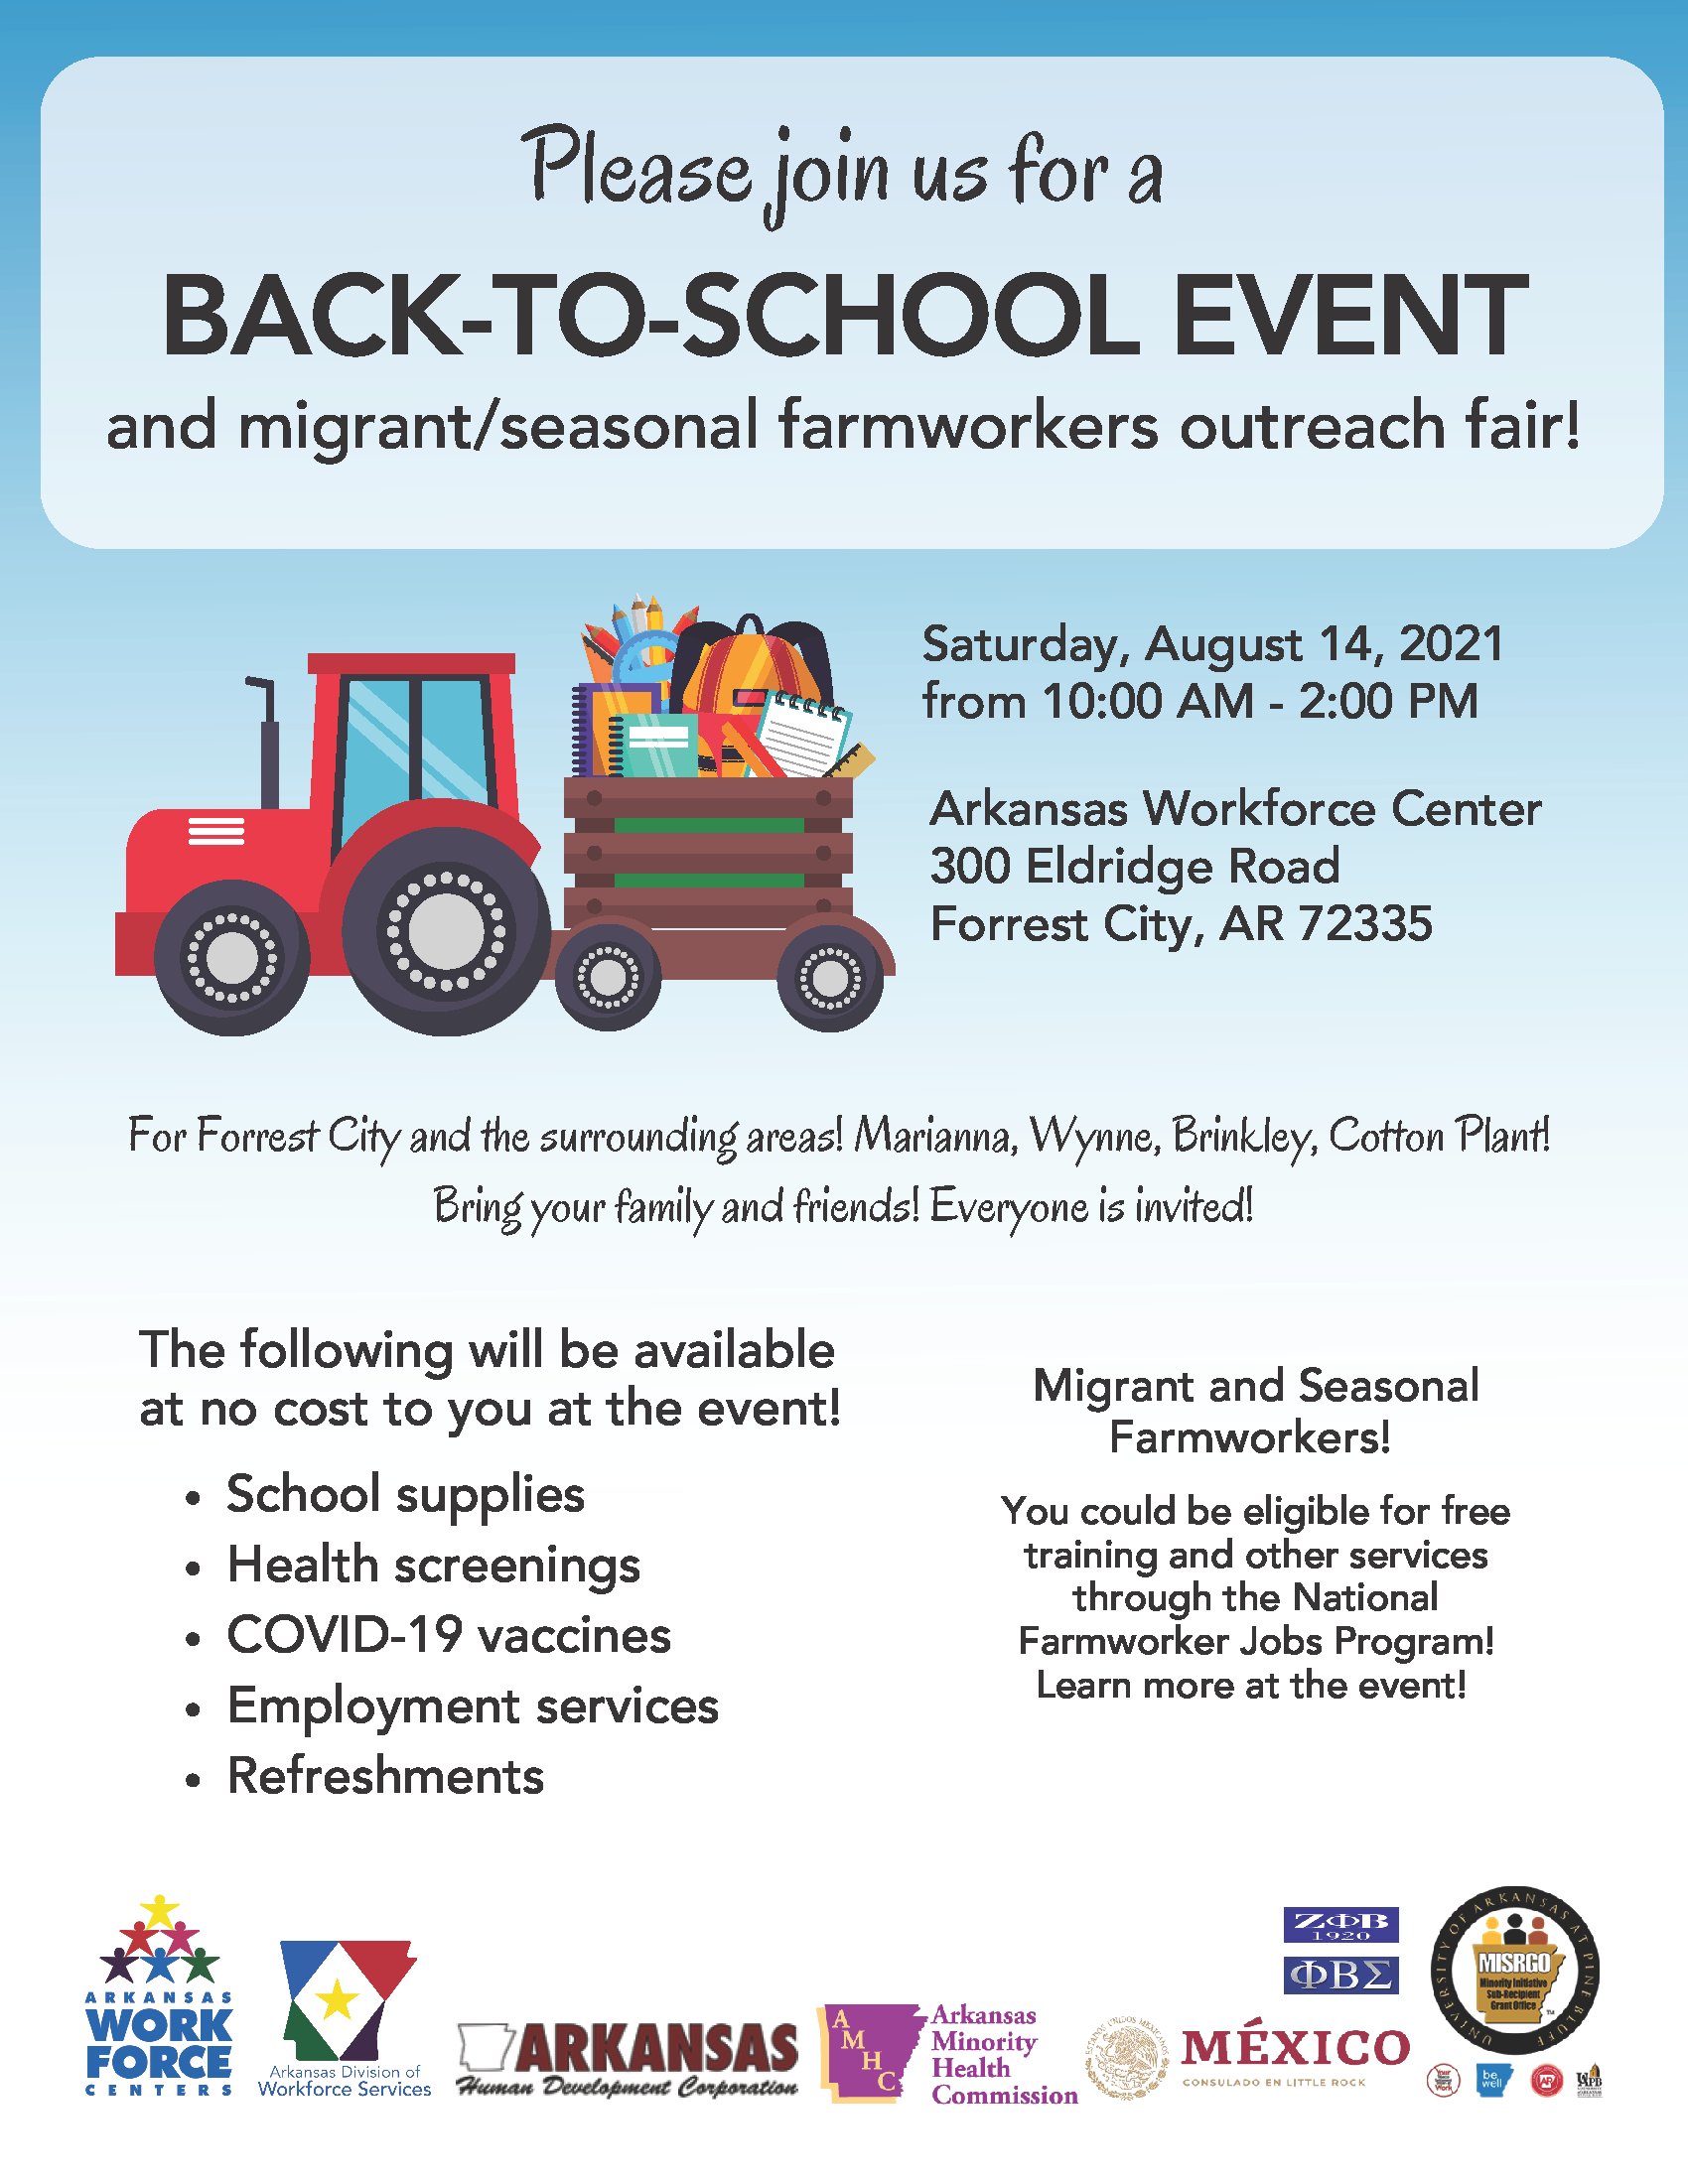 Arkansas Division of Workforce Services on X: Come by for free school  supplies, food, and more at the Back-to-School Event and Migrant/Seasonal  Farmworker Outreach Fair in Forrest City this Saturday, 8/14, 10a.m.-2p.m.!